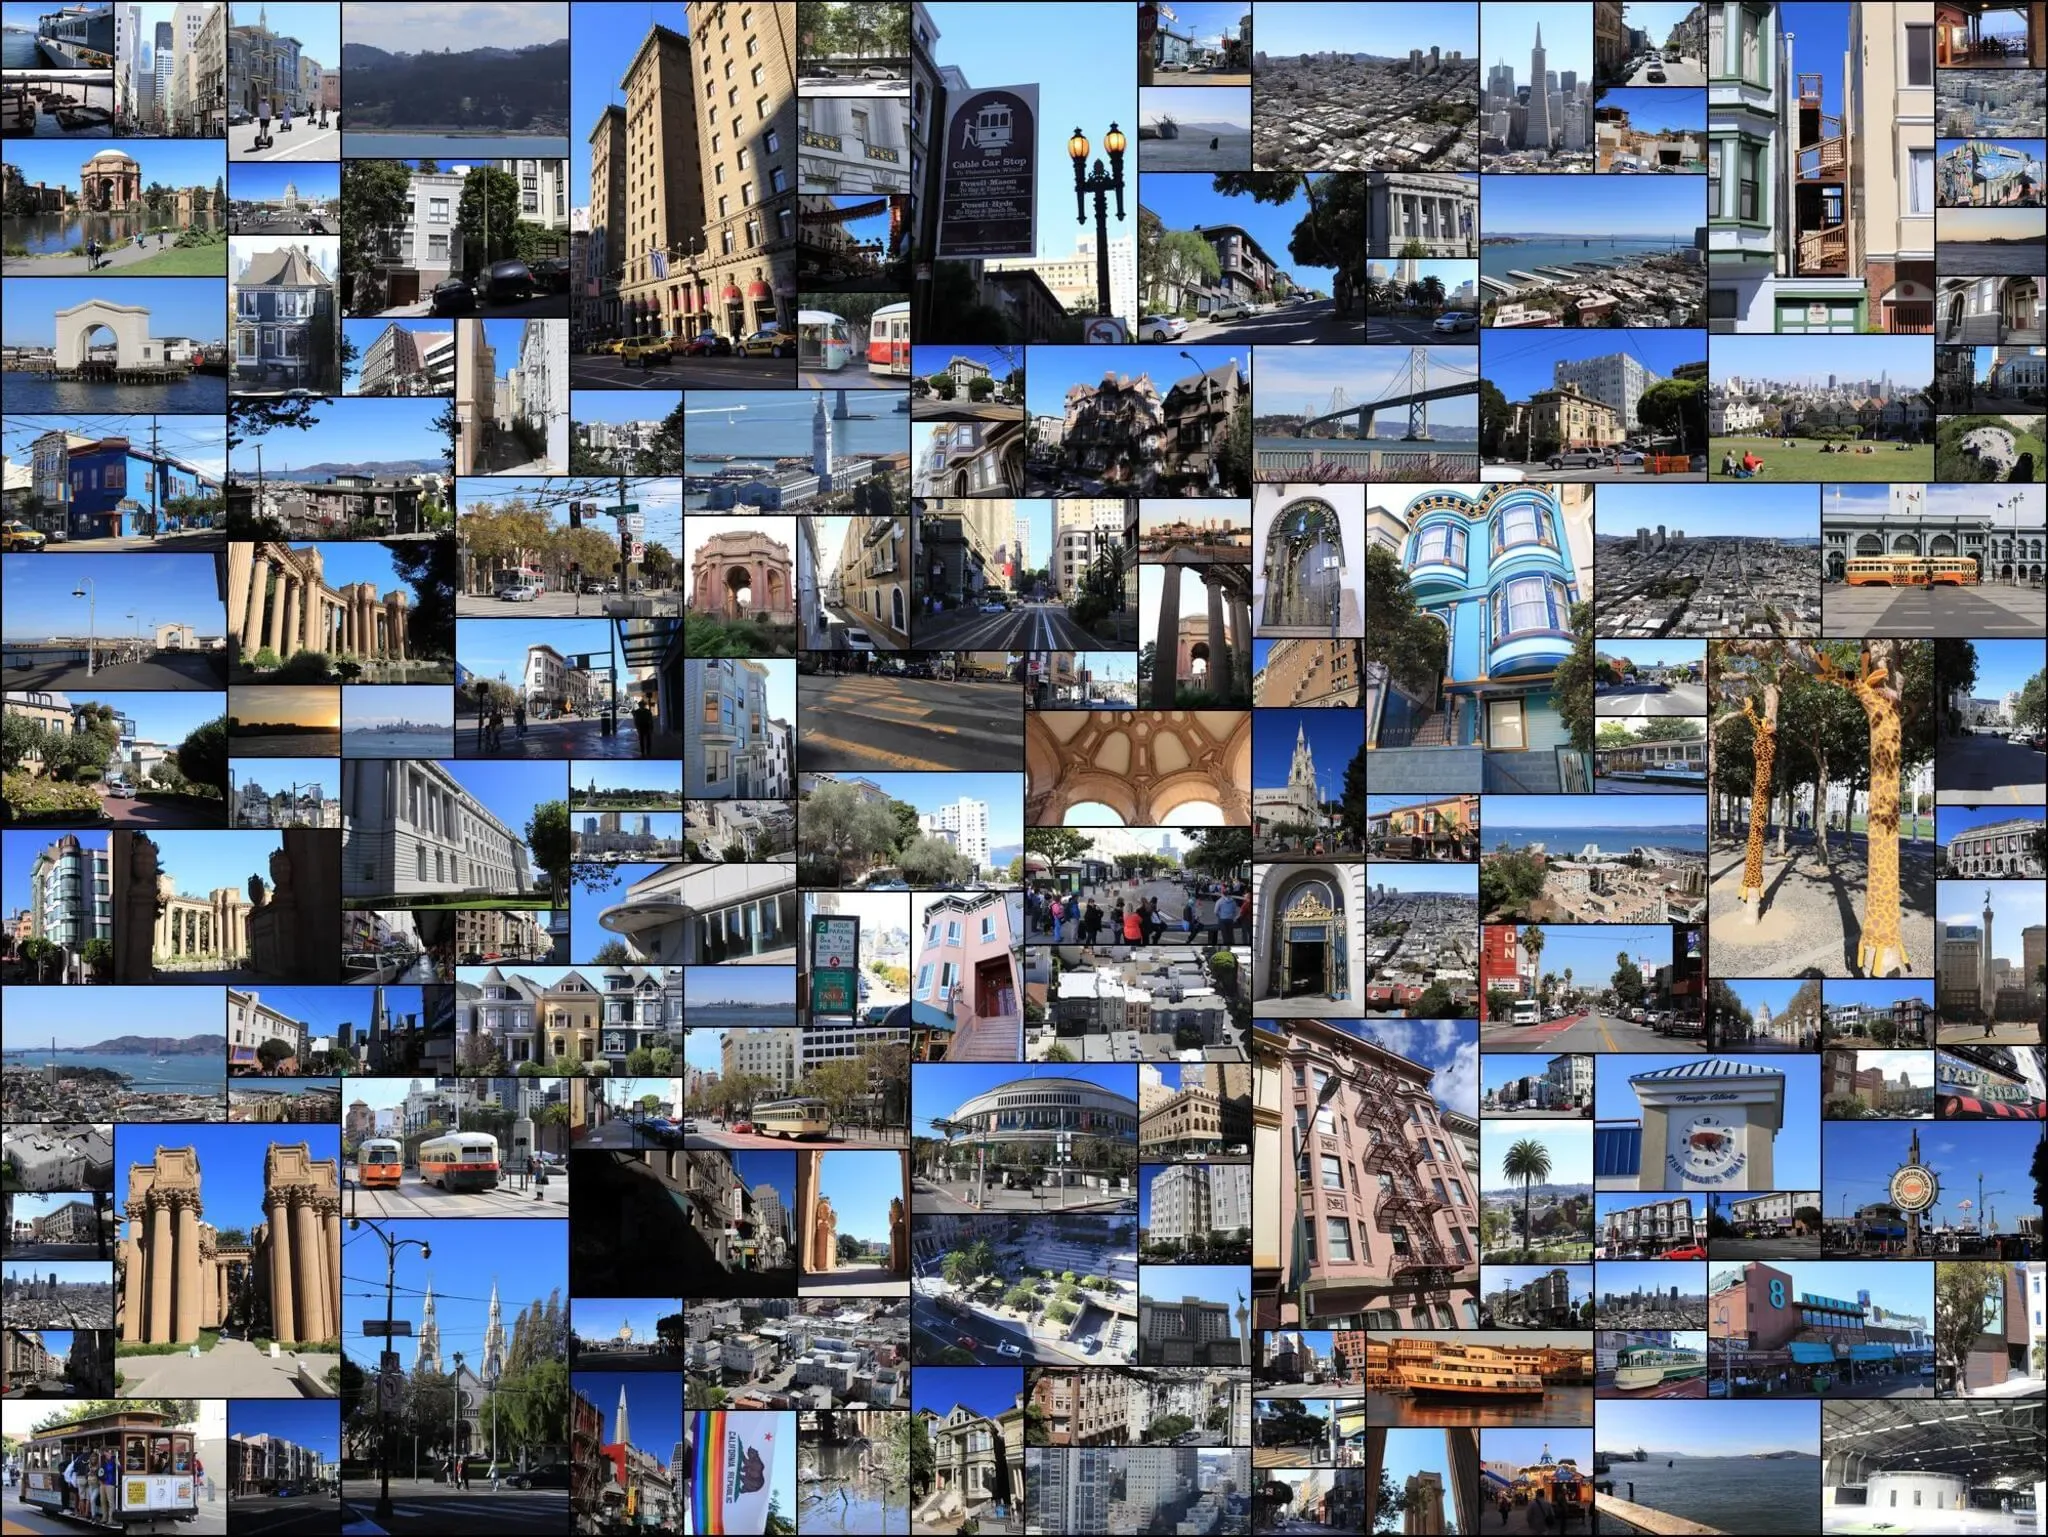 751 photos of San Francisco Streets and Cityscape